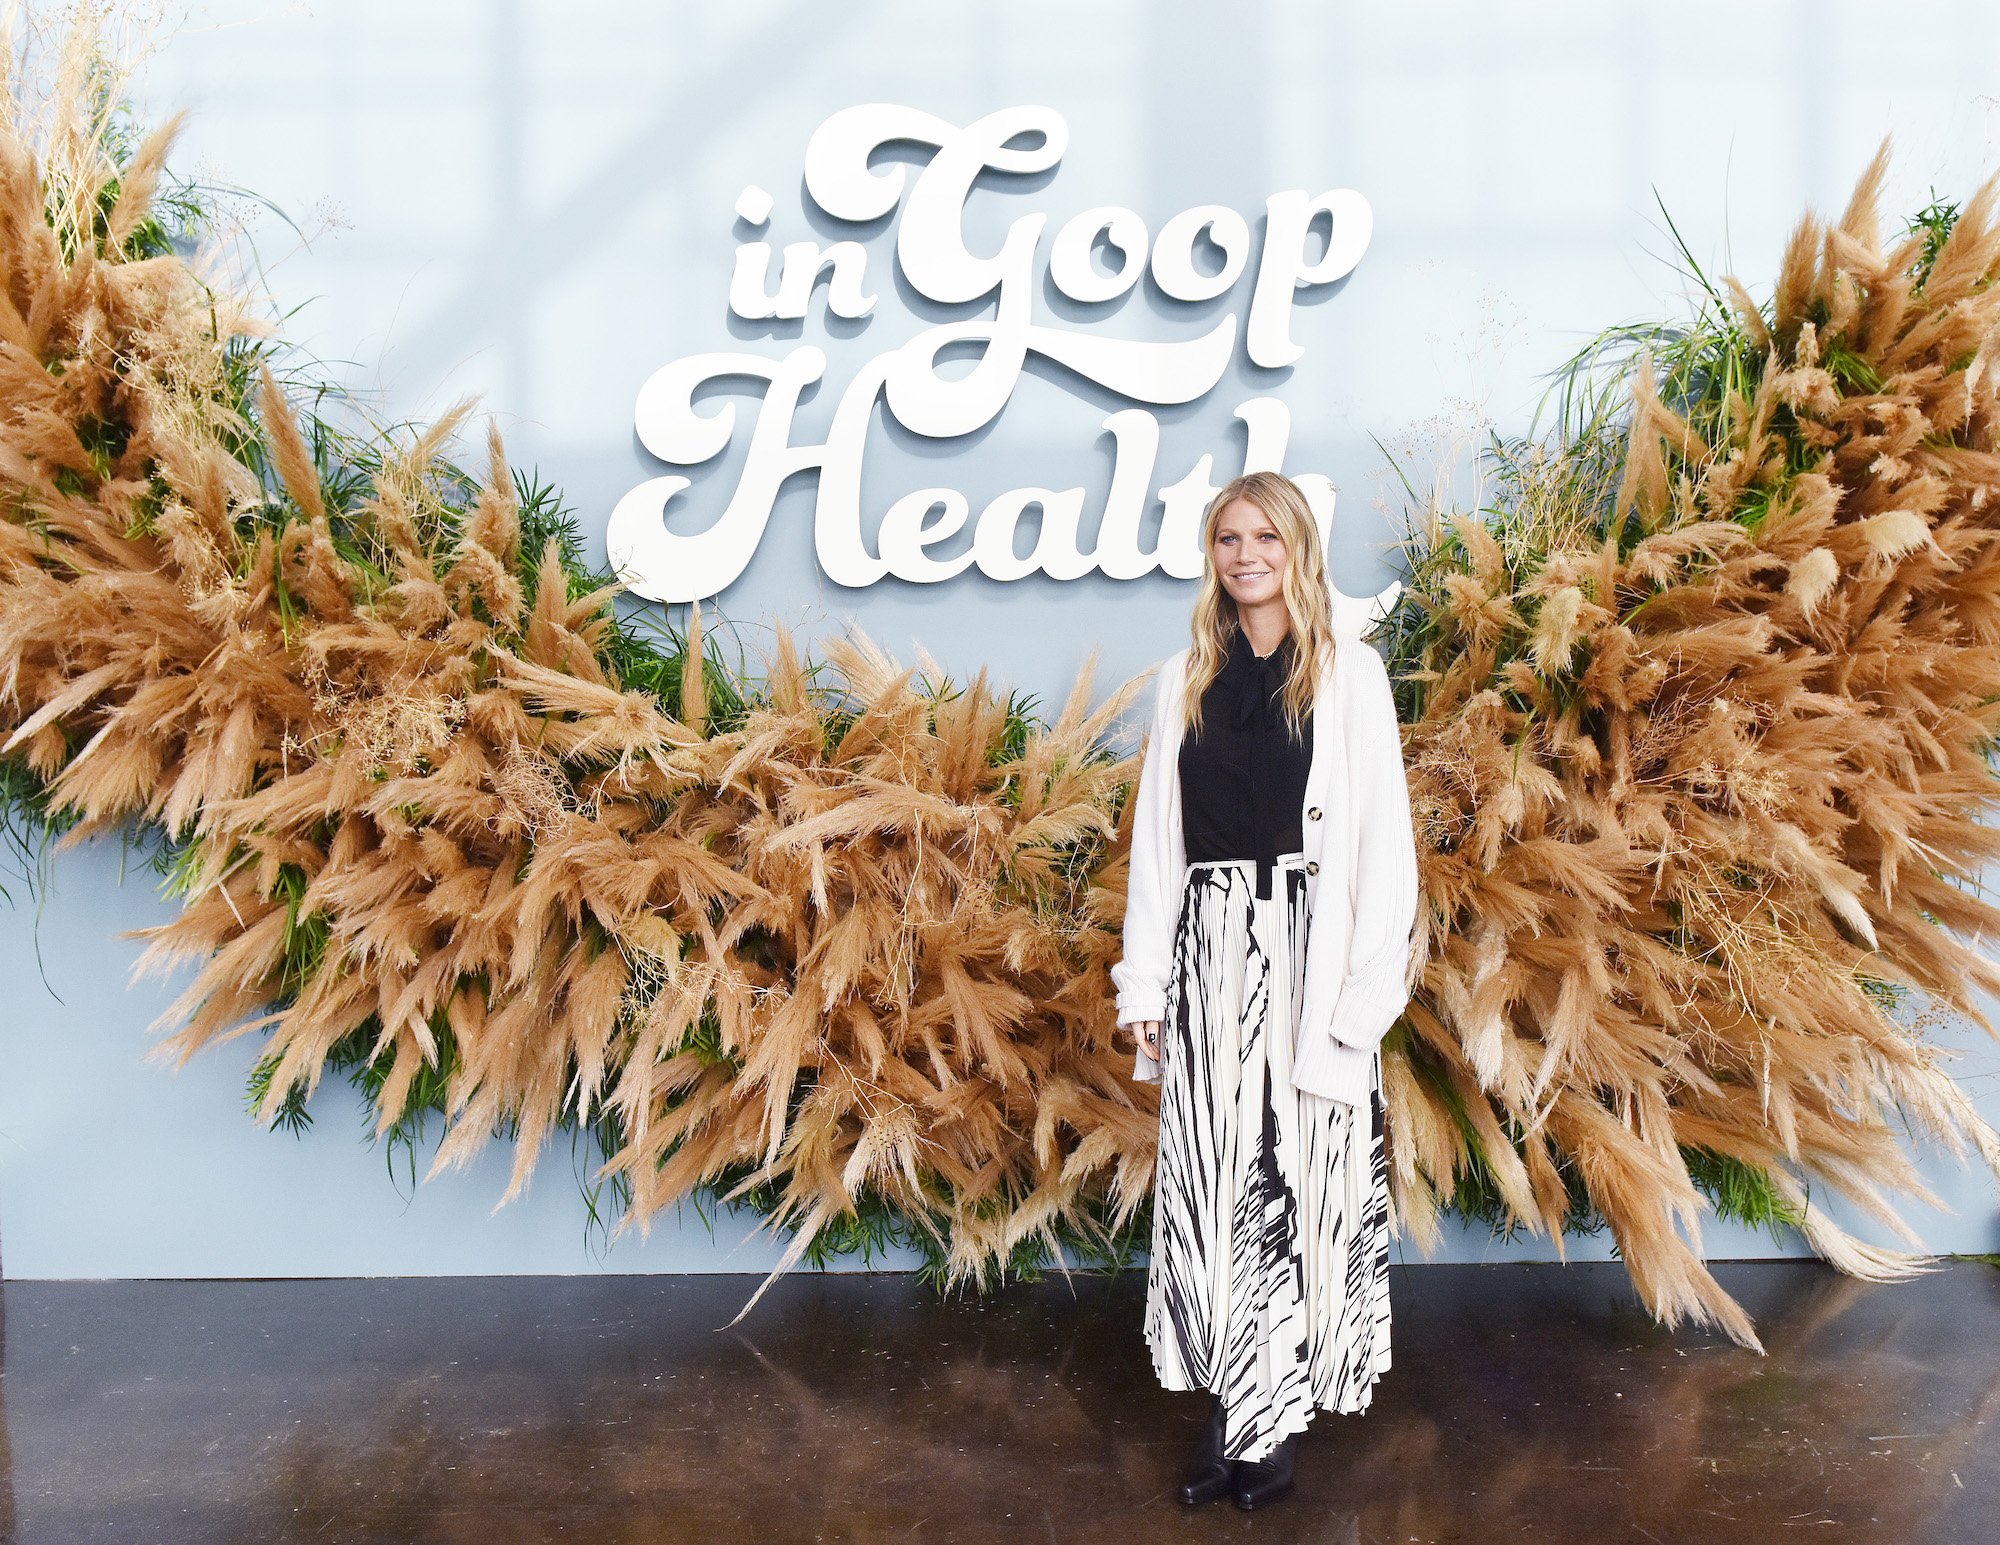 Gwyneth Paltrow smiling in front of a giant wreath